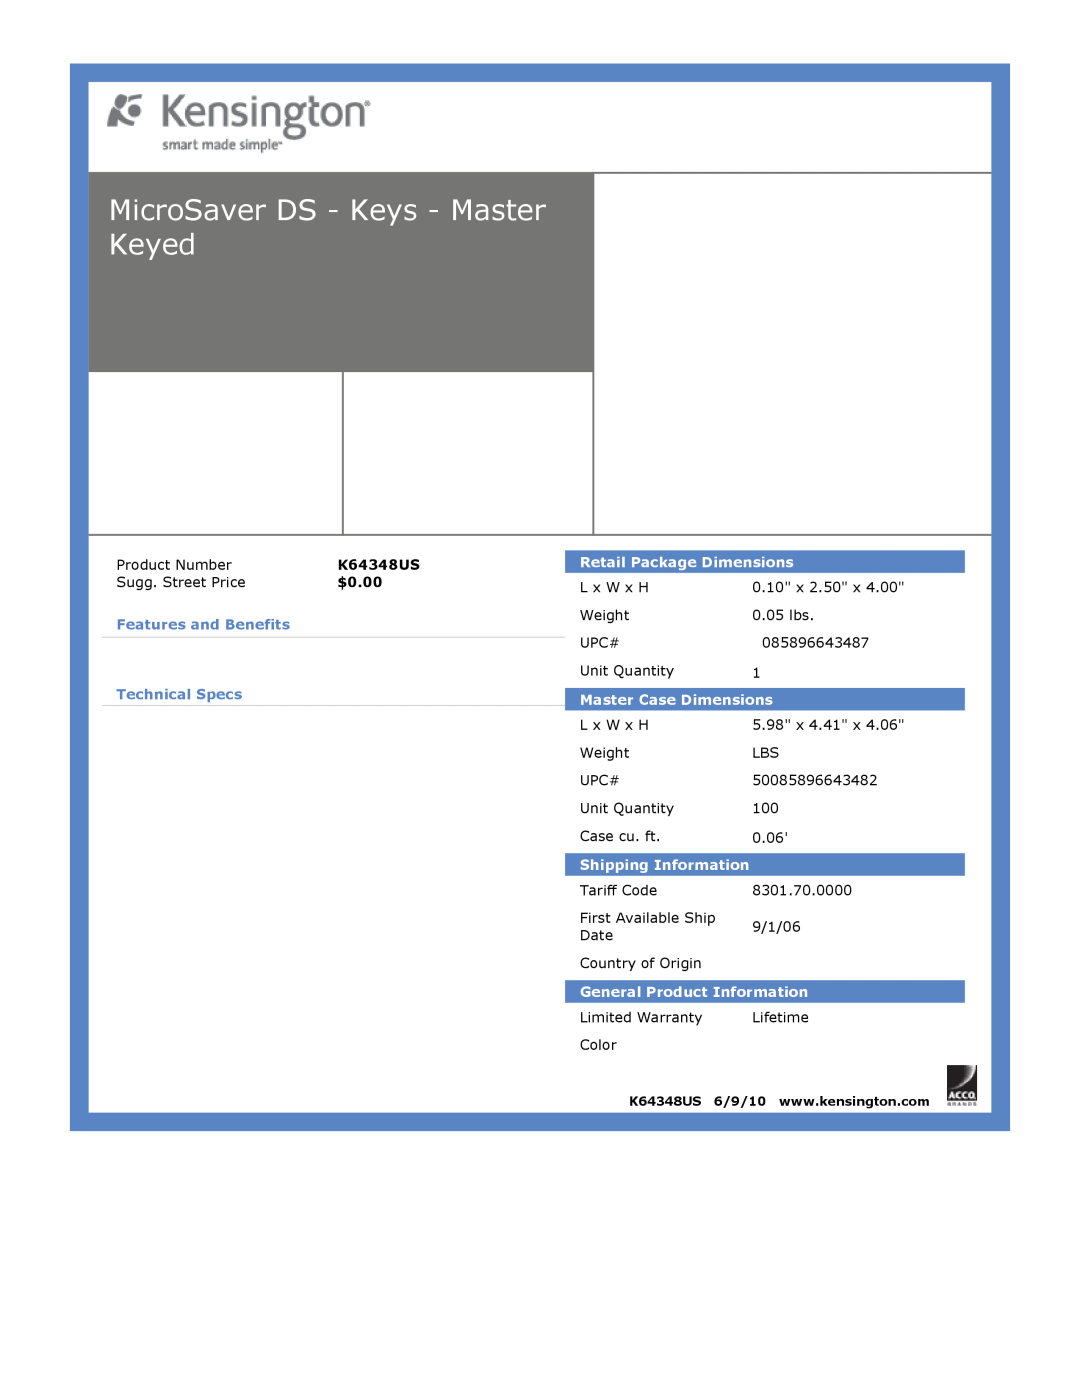 Kensington EU64325 dimensions MicroSaver DS - Keys - Master Keyed, $0.00, Features and Benefits Technical Specs 